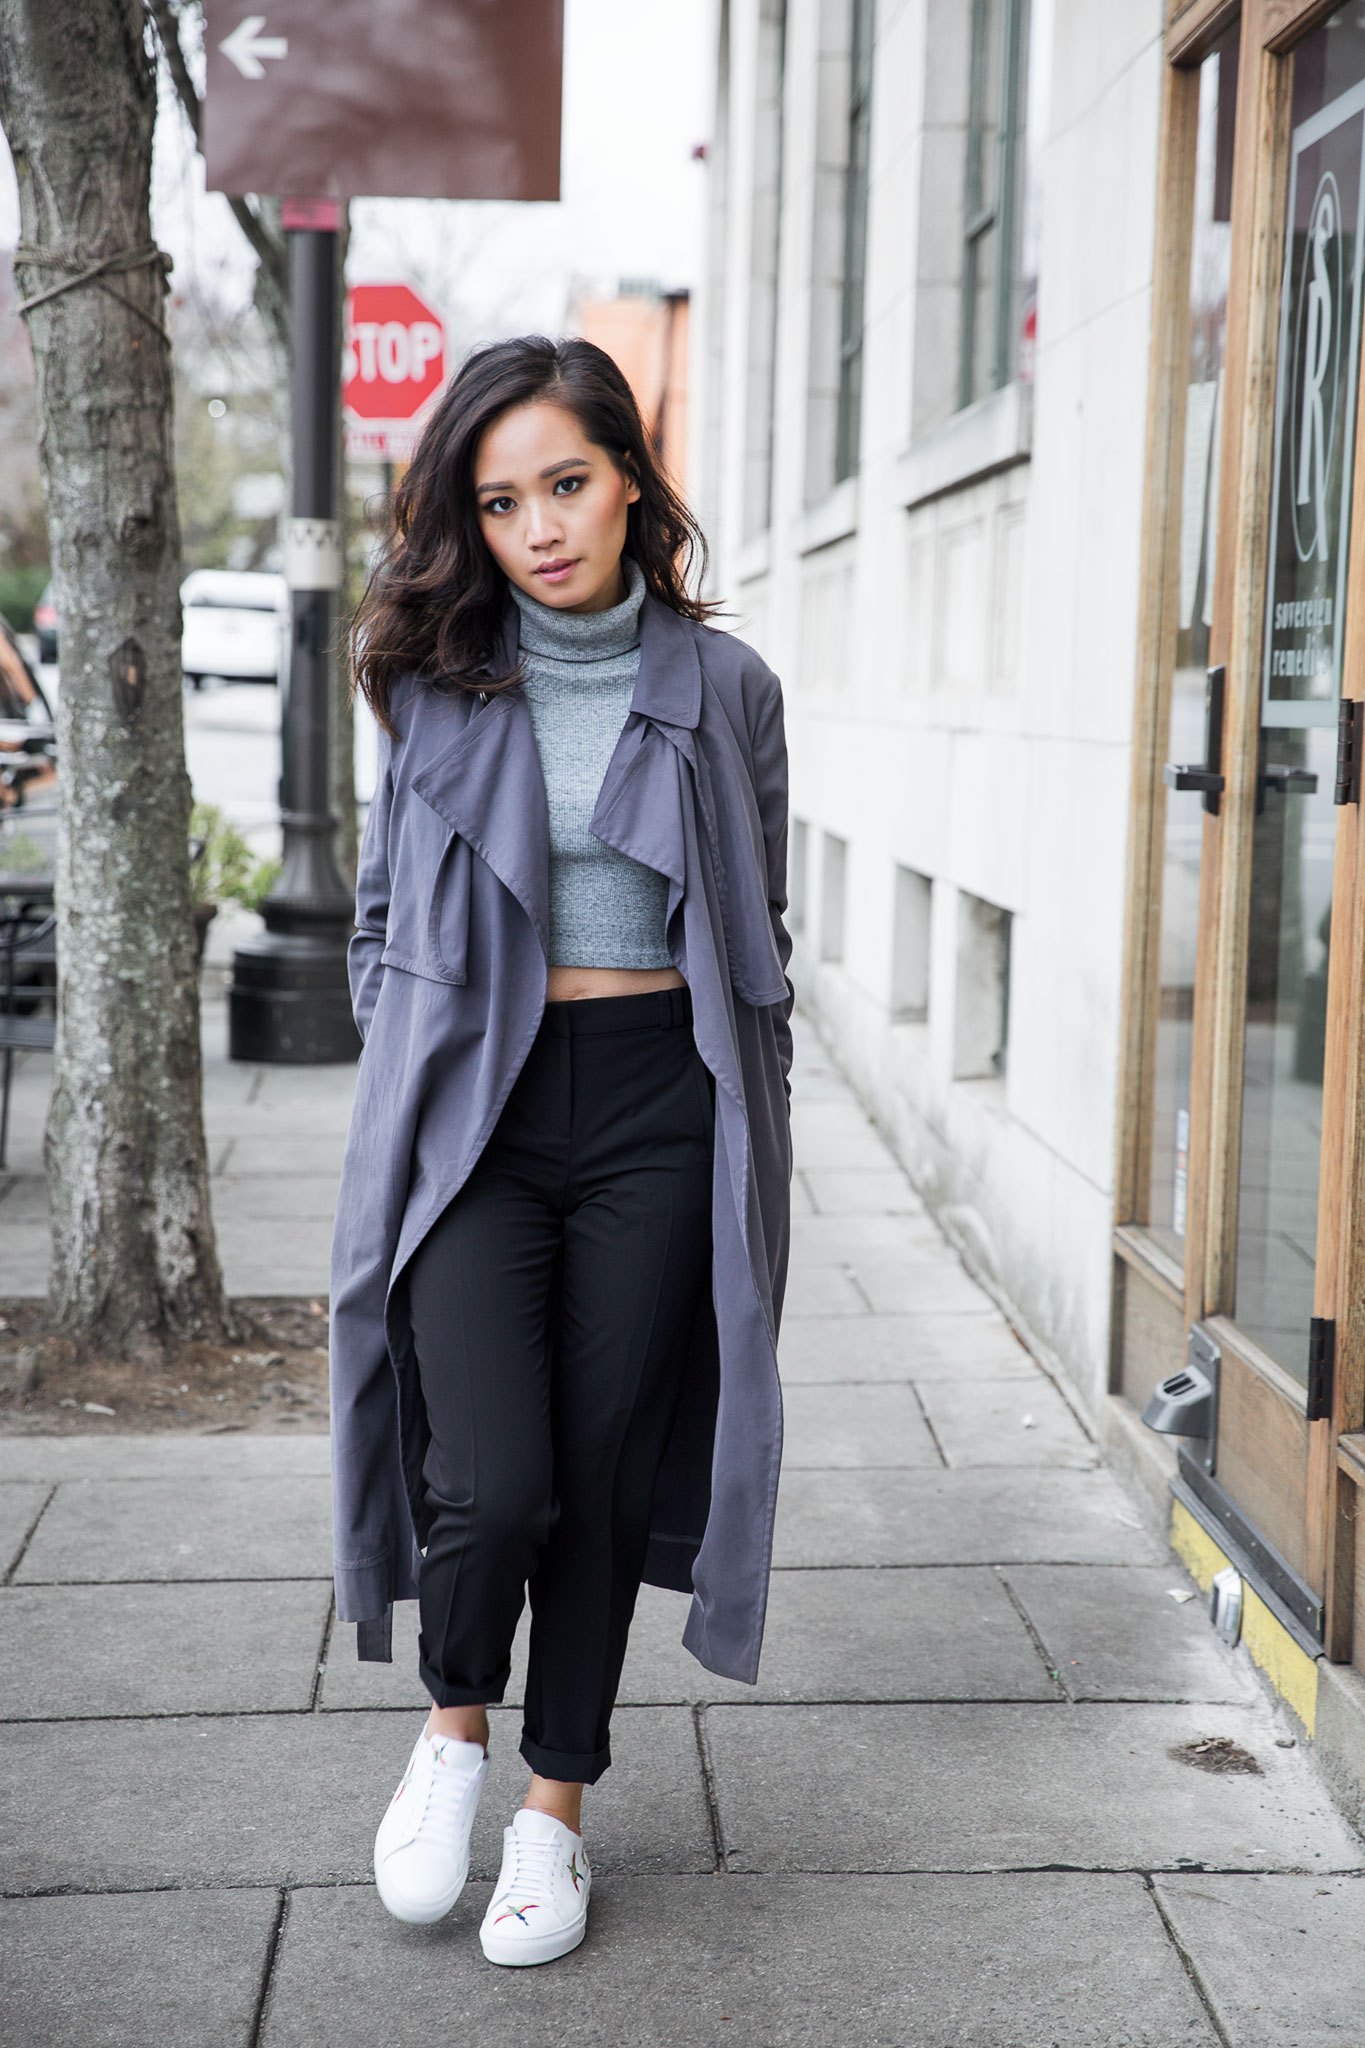 gray turtleneck outfit with white sneakers | le-jolie.com